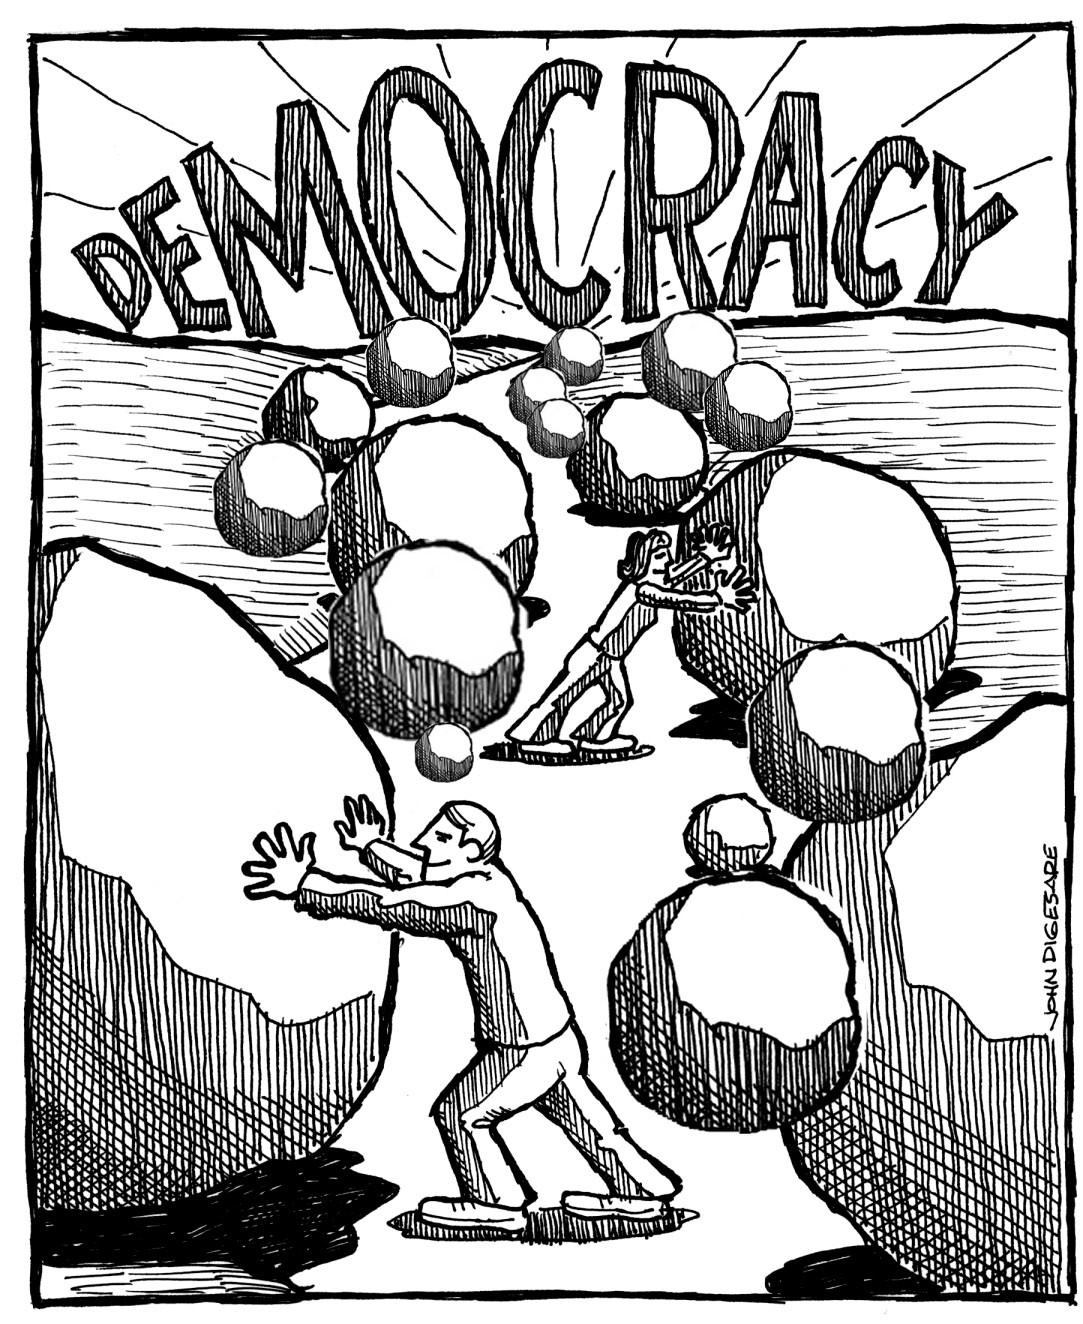 Democracy-A Compromise Story